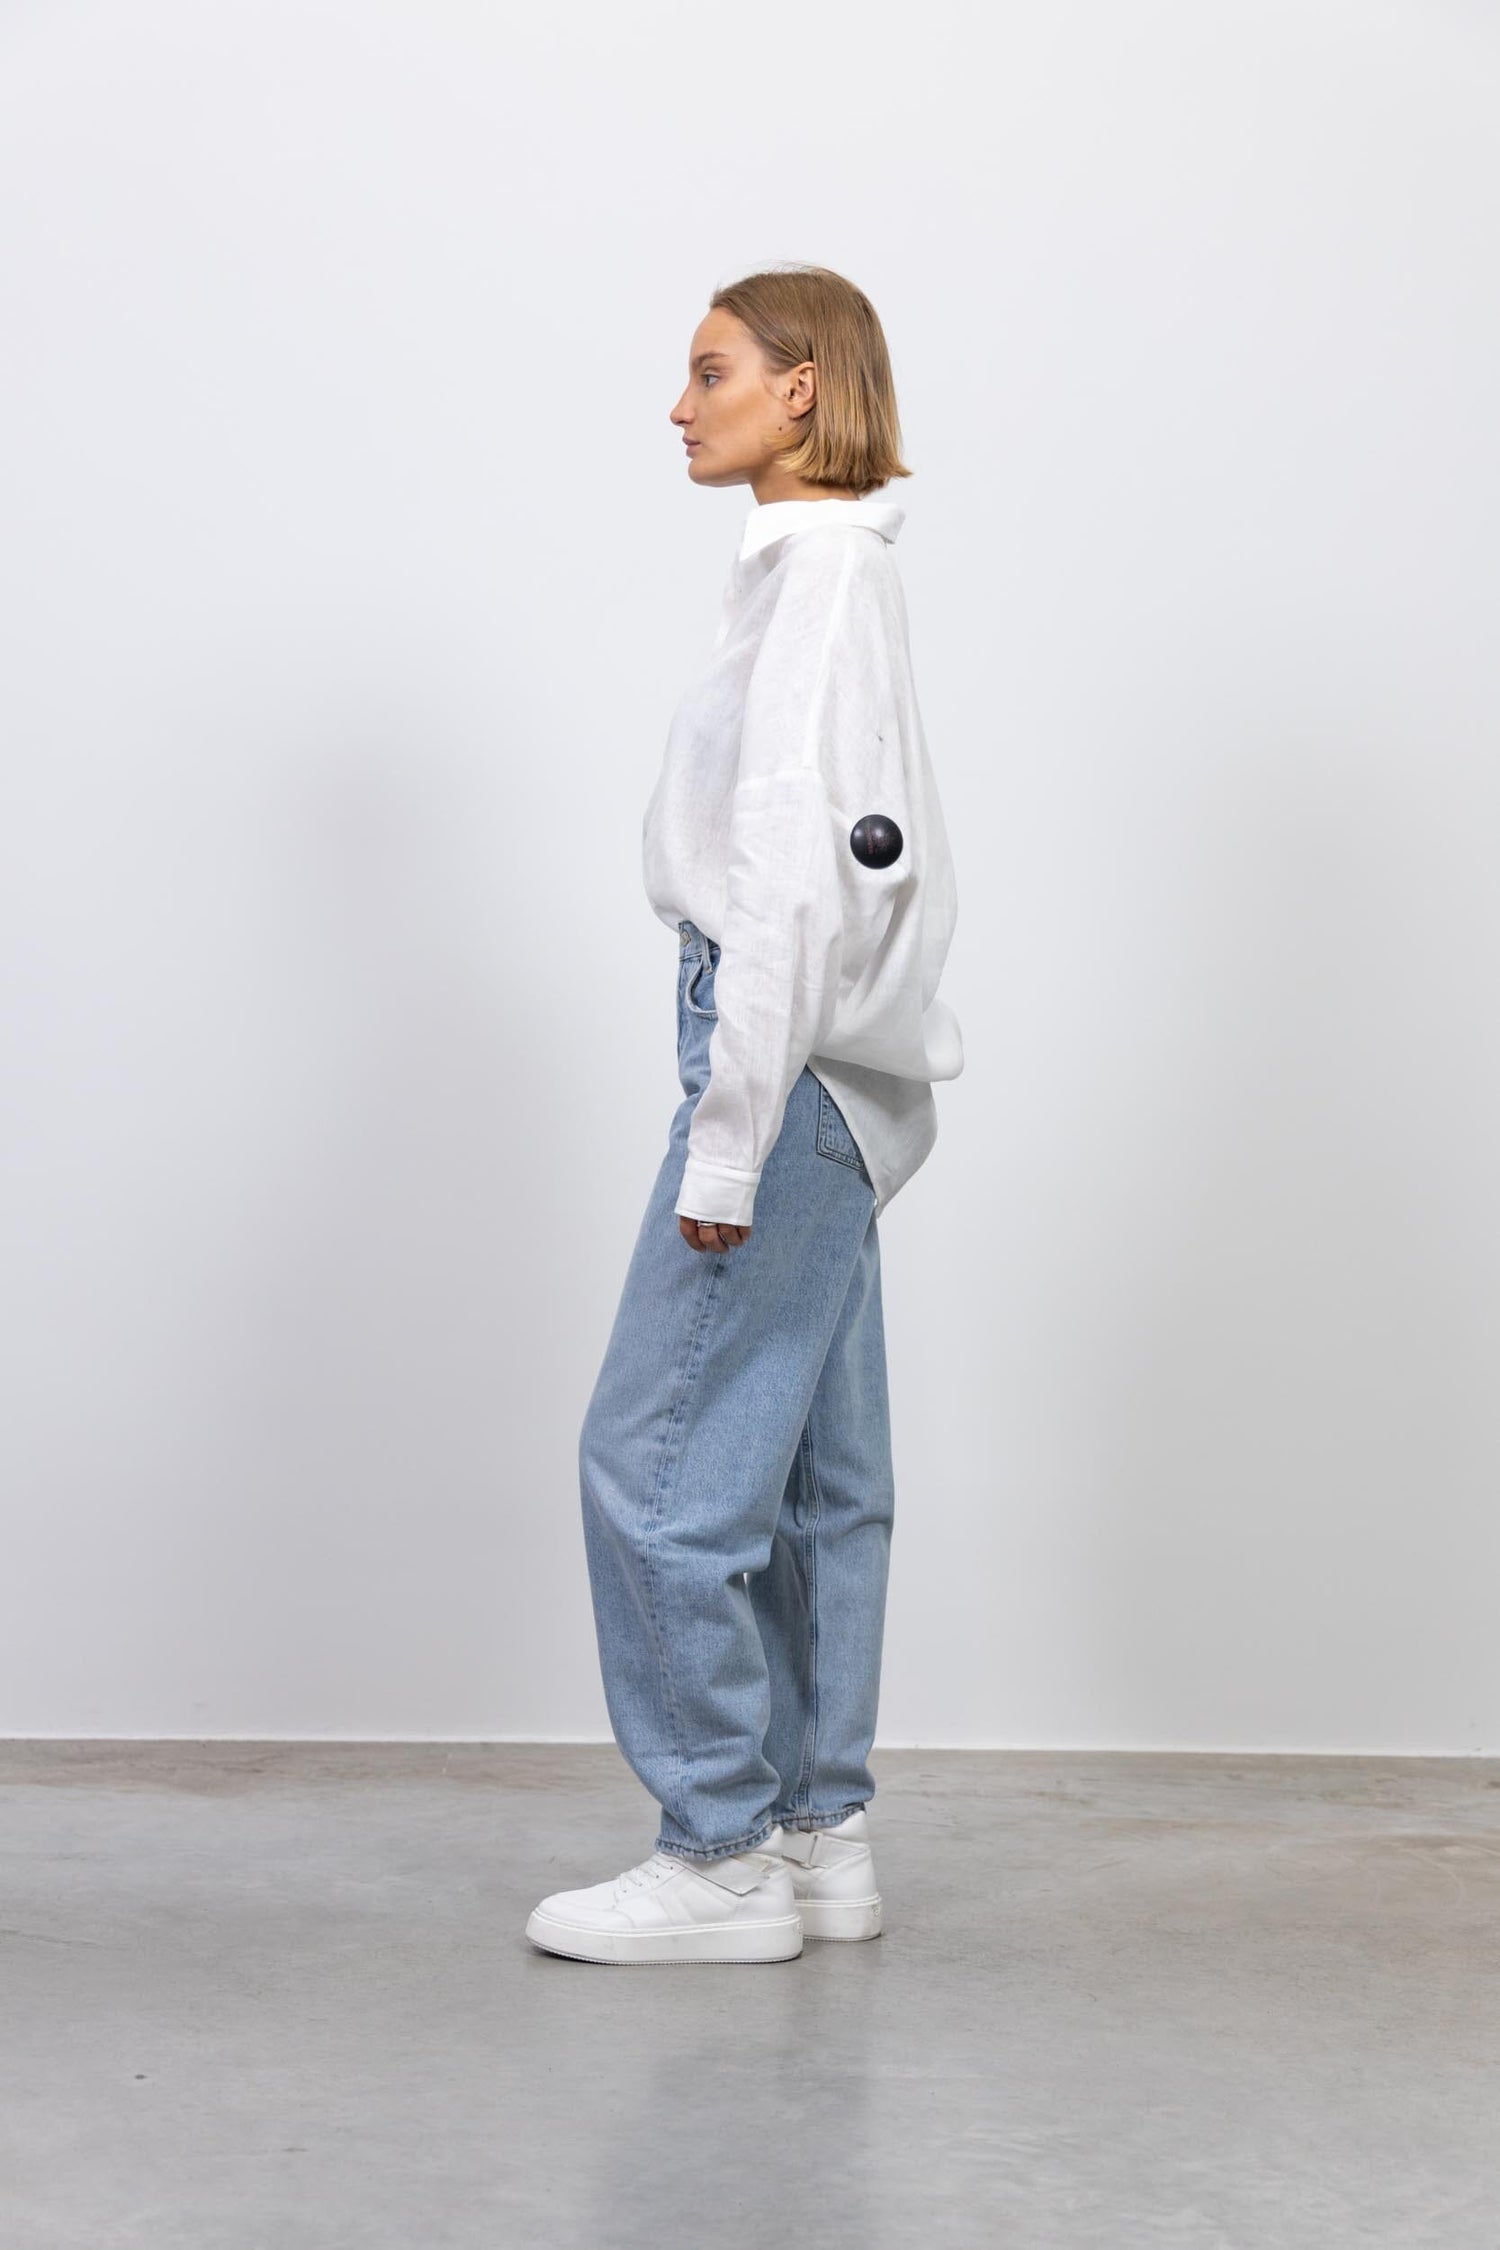 Zara Gray High Waisted Z1975 Baggy Paperbag Jeans | High waisted pants  outfit, Chic outfits, Outfits